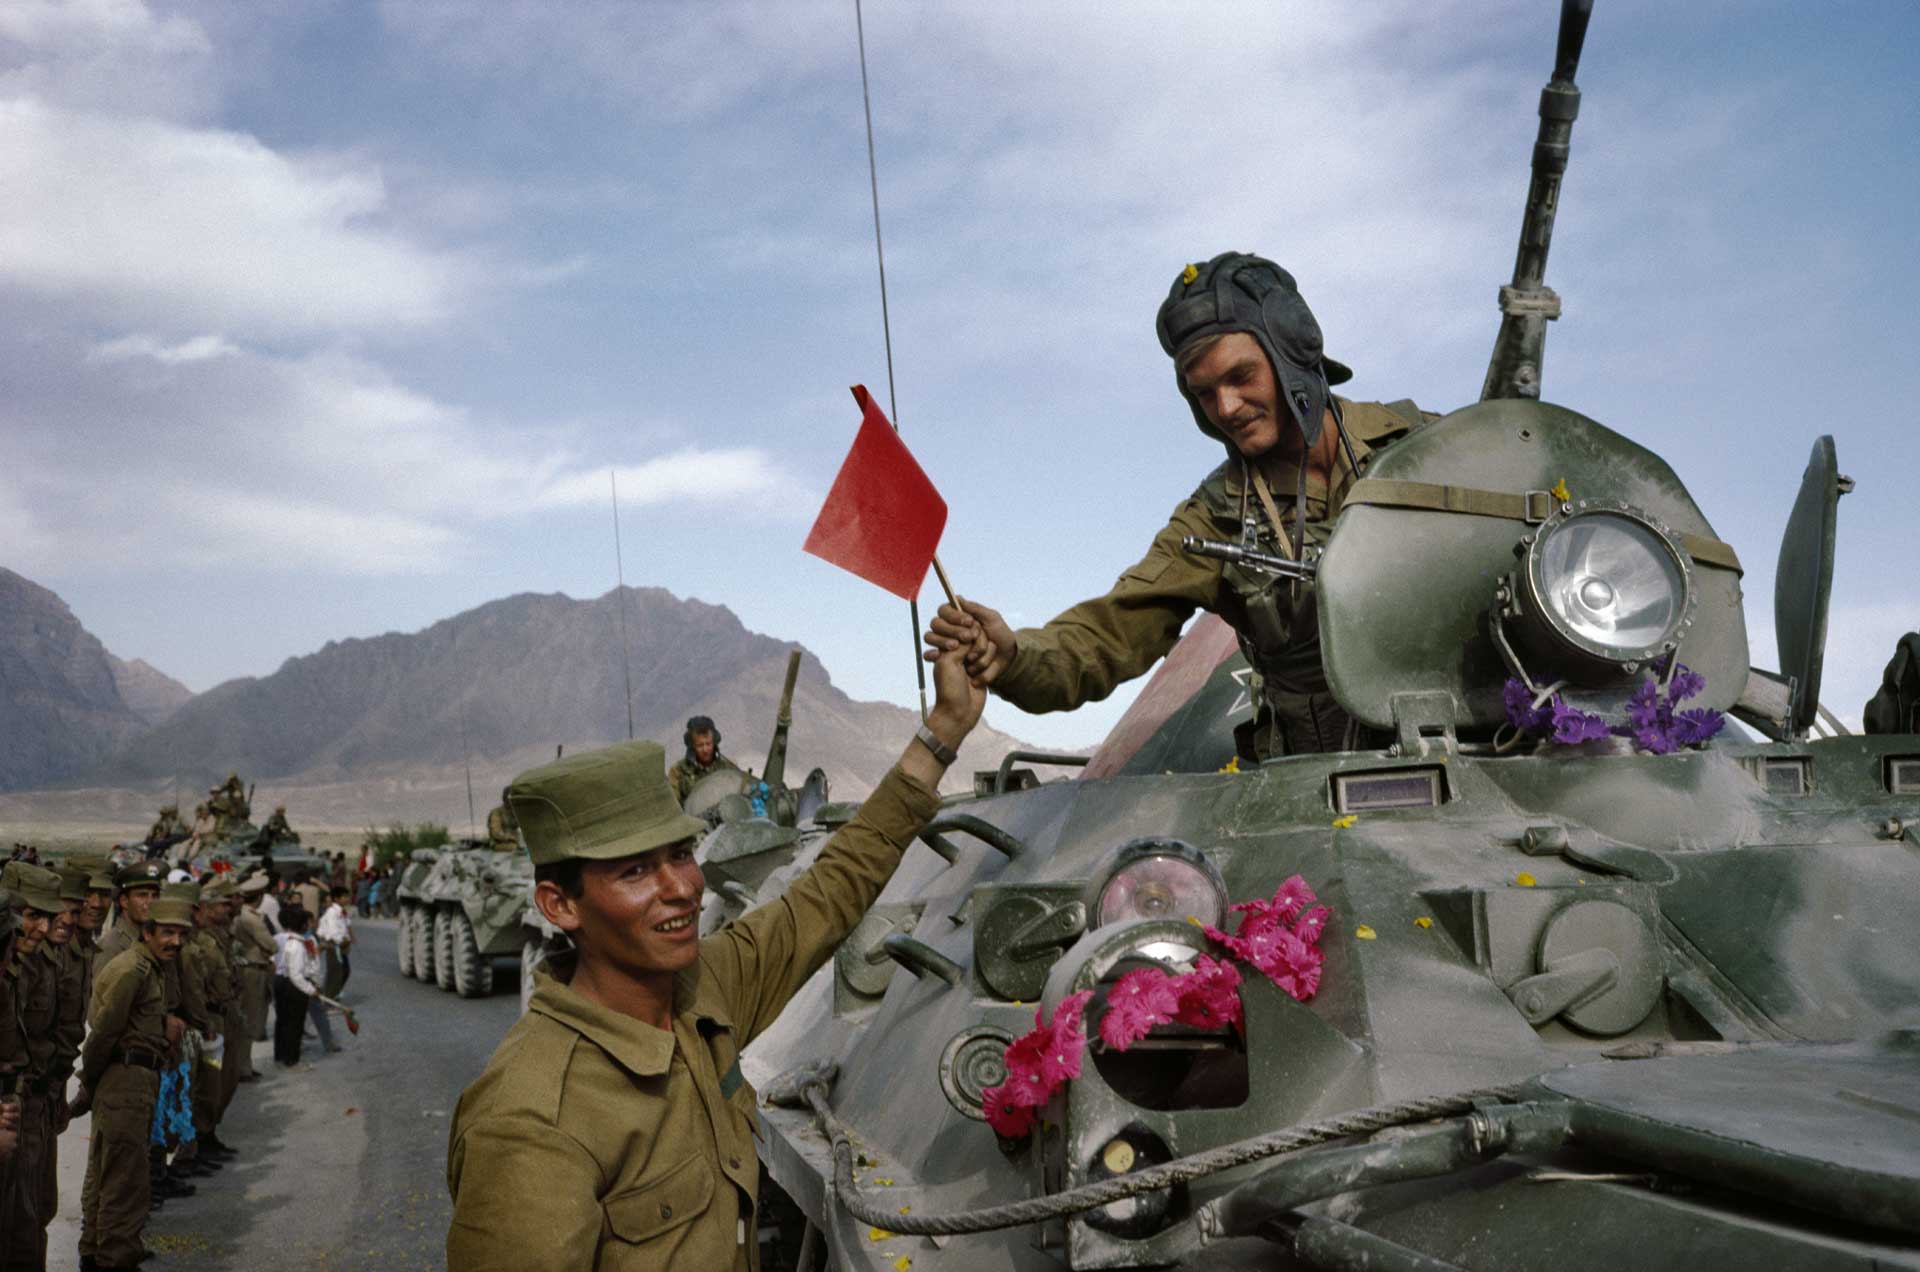 In the foreground, a soldier in a tank is handing over a red flag to a smiling soldier standing below. In the background, men in uniform stand by the side of the road, watching as the tanks pass by.